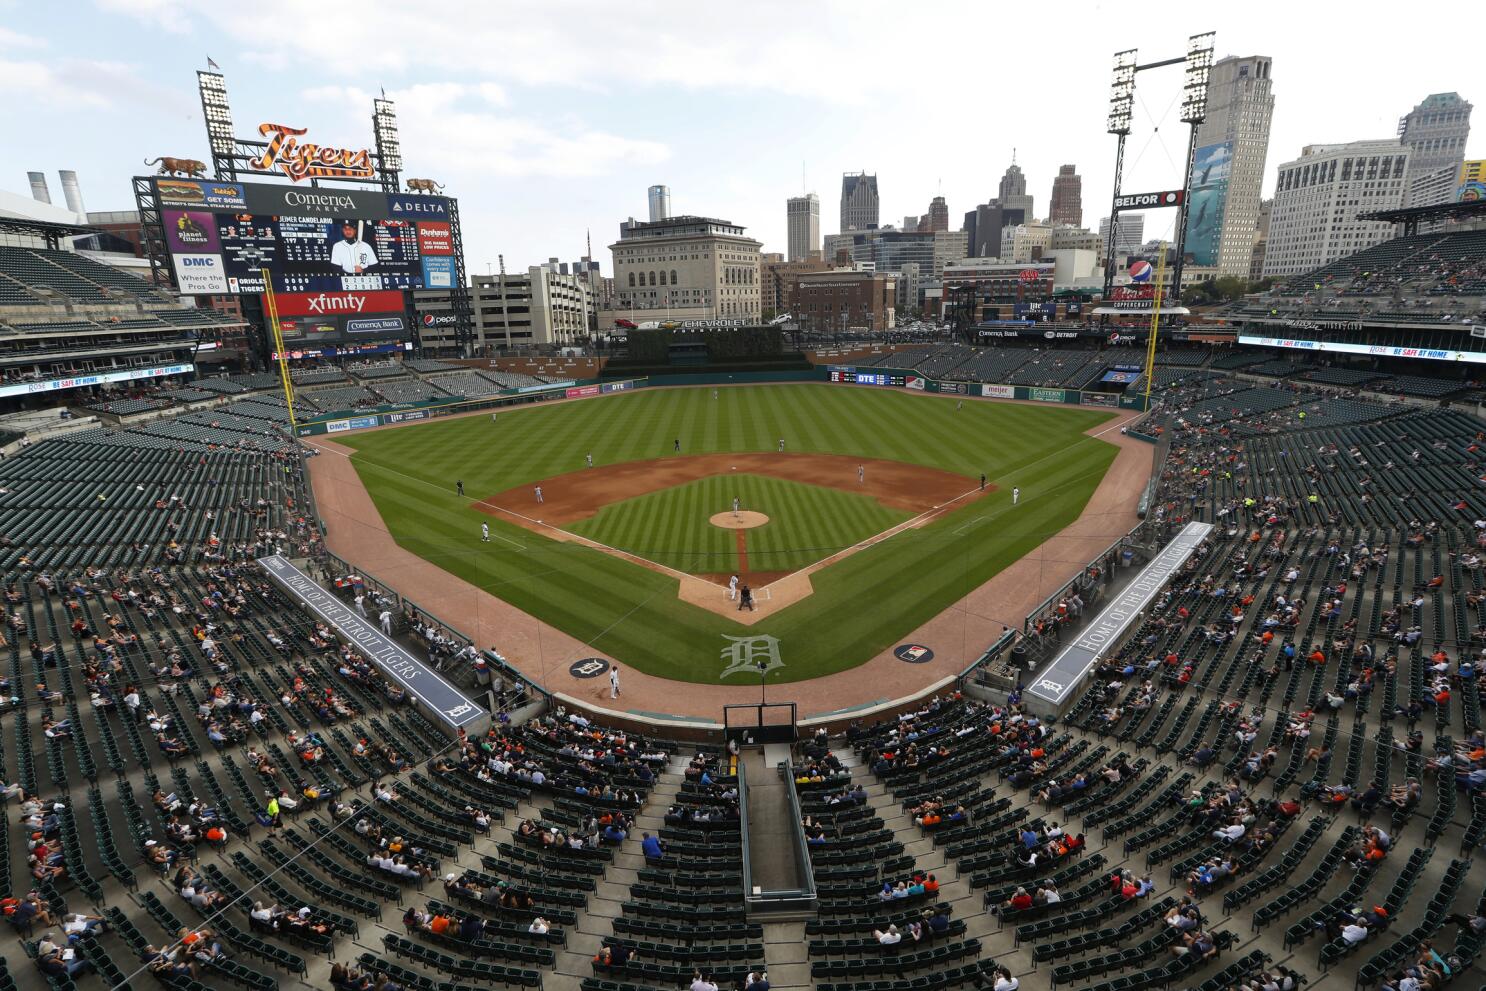 A guide to new Tigers apparel and merchandise at Comerica Park 